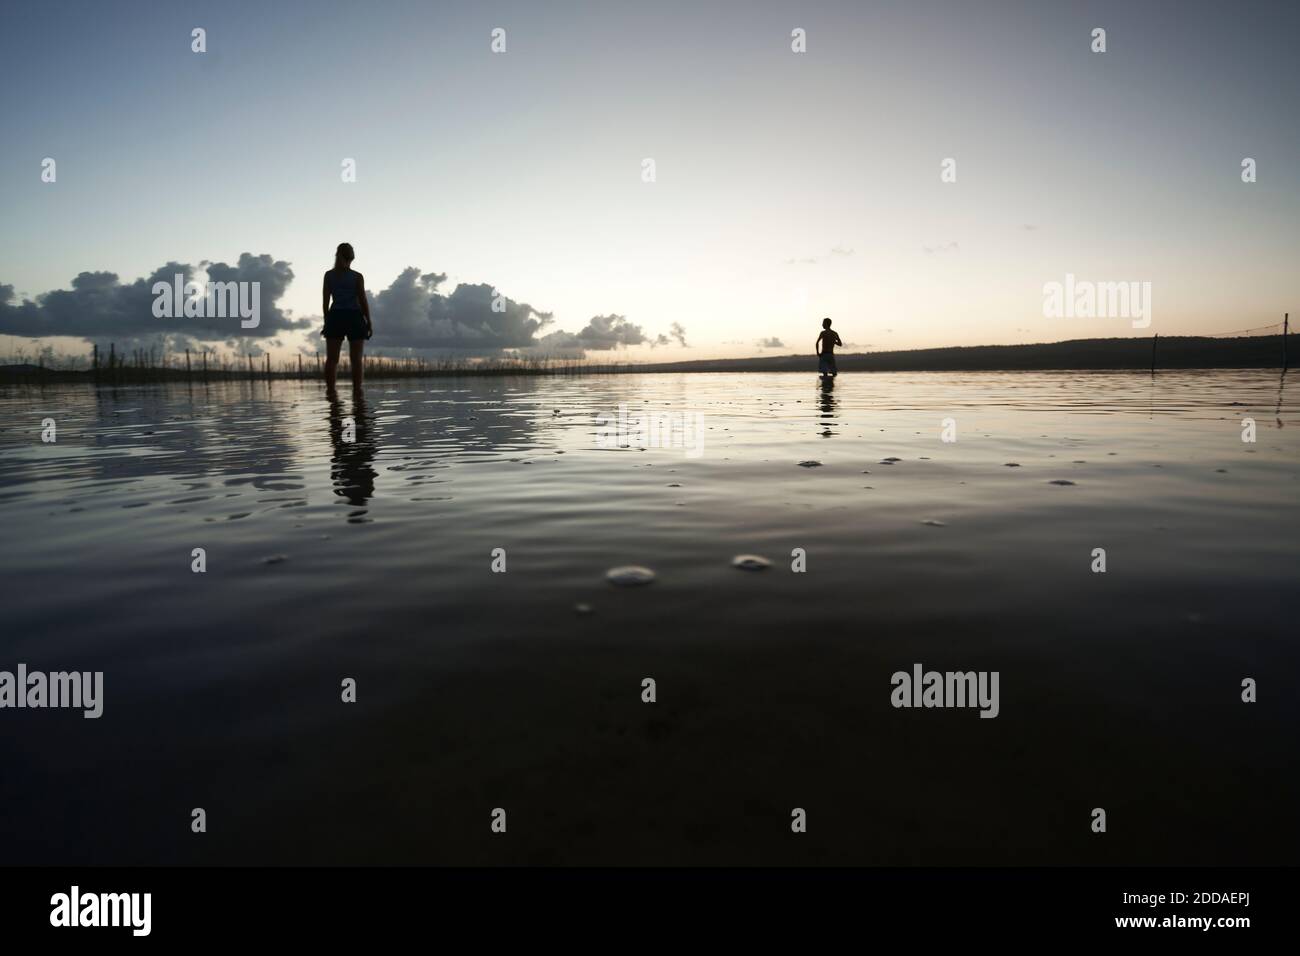 Silhouette tourists at beach with reflection in water against sky during sunset Stock Photo